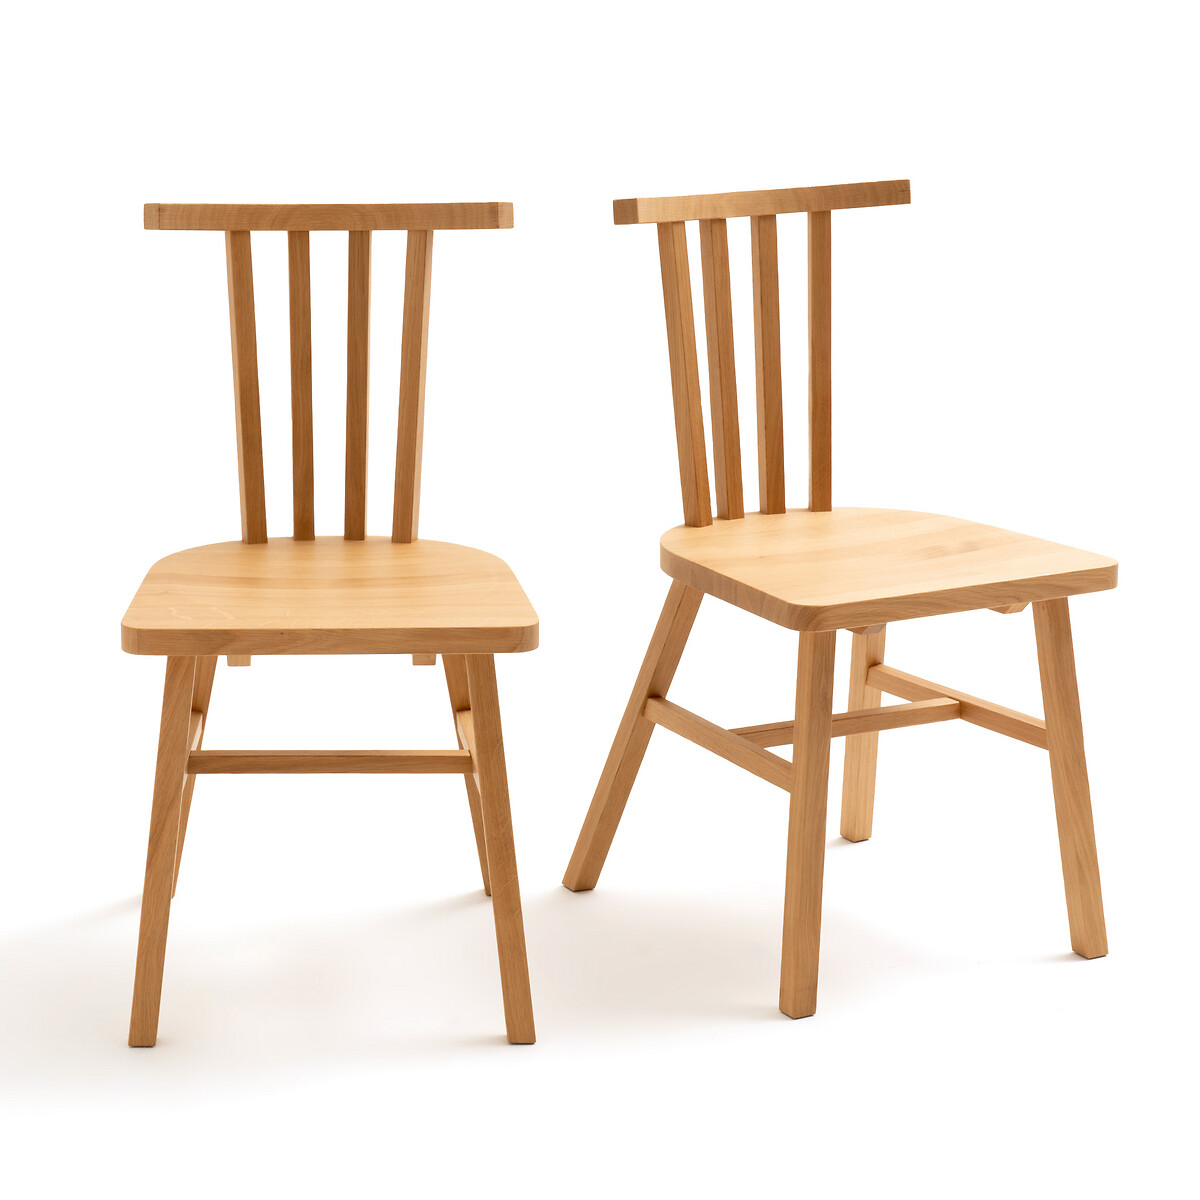 Set of 2 Ivy Chairs with Bars in Solid Oak